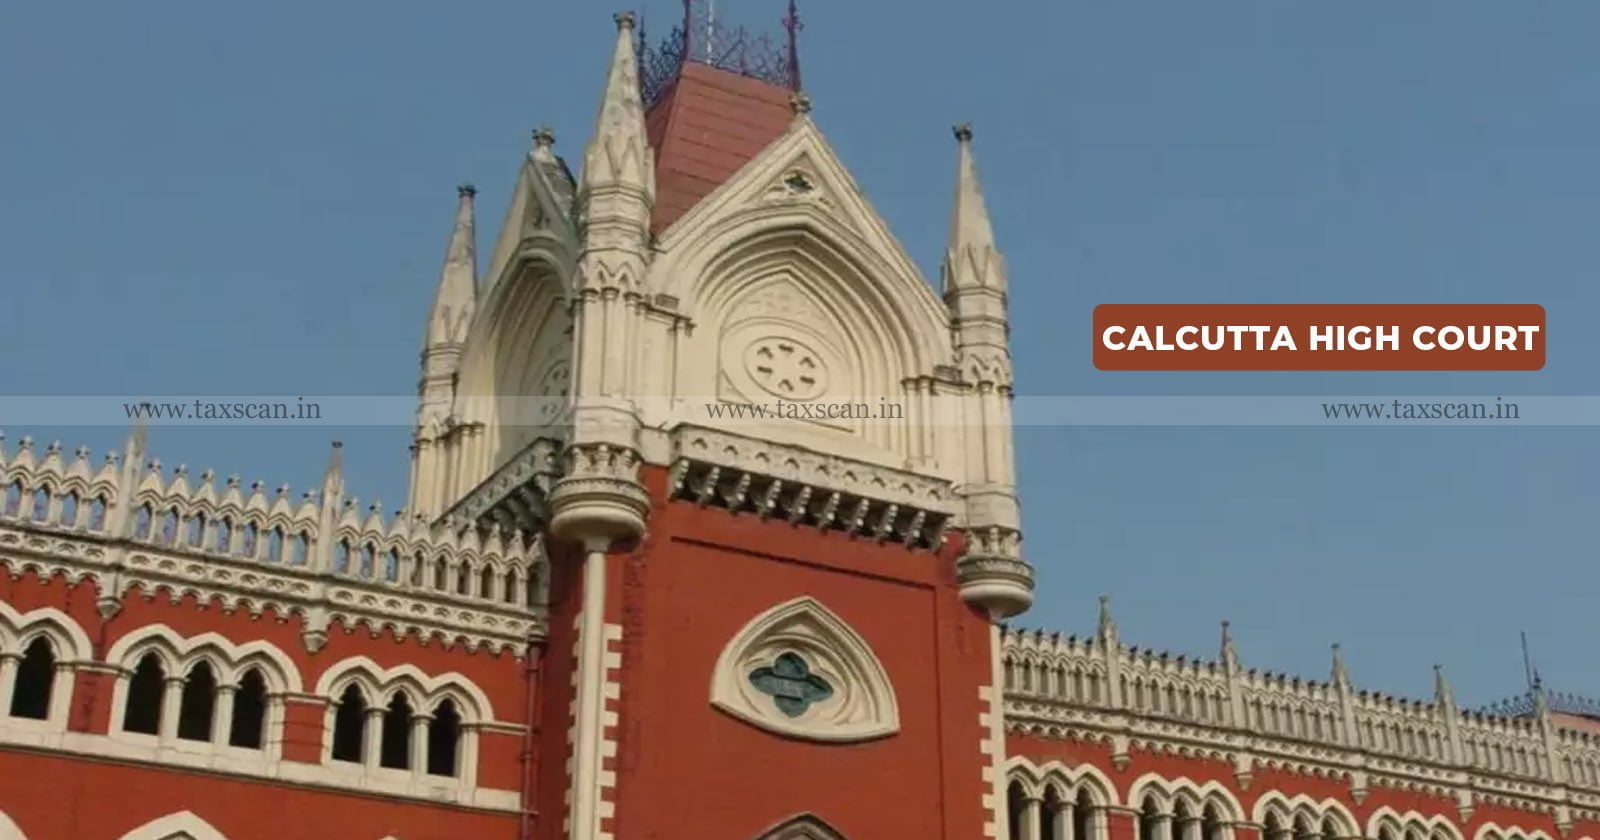 Initiation - of - Re - assessment - proceeding - beyond - barred - by - Limitation - not - valid - Calcutta - HC - TAXSCAN